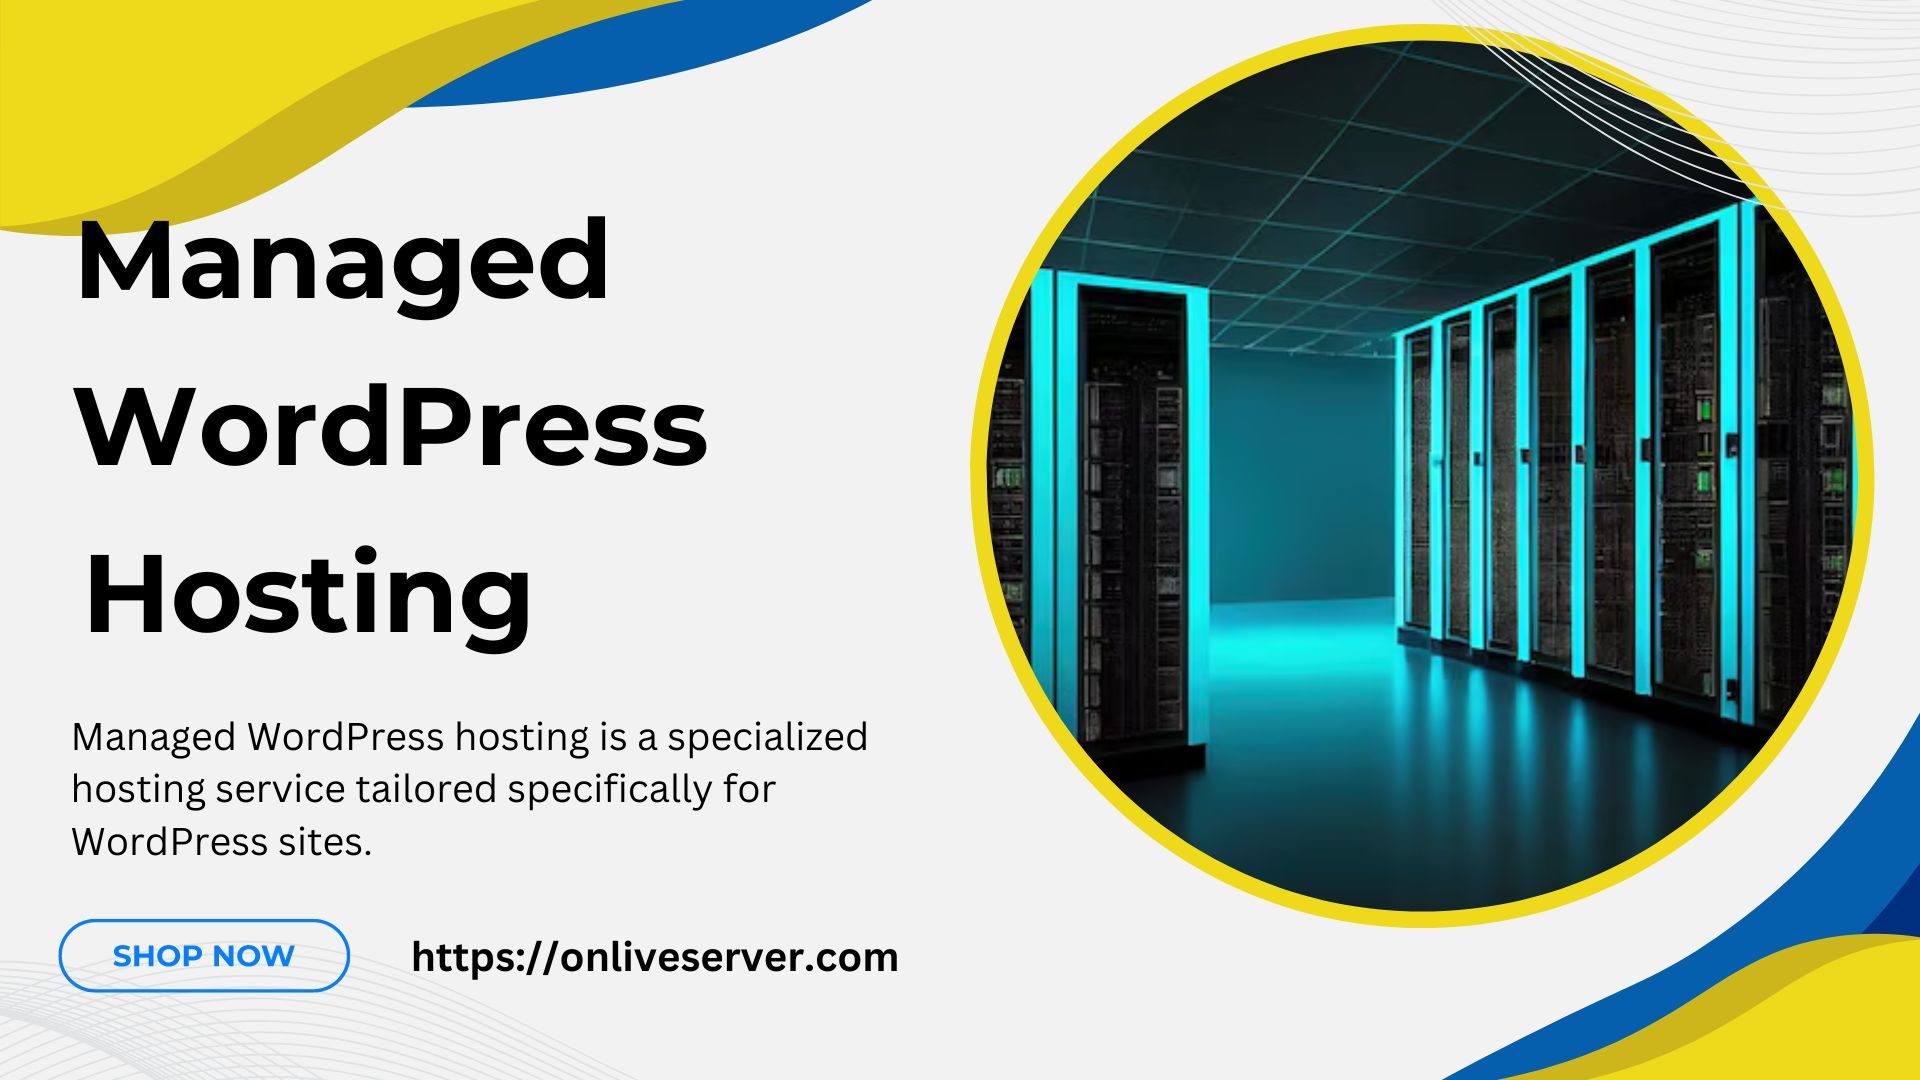 Illustration showing the key benefits of Managed WordPress Hosting, including enhanced performance, security, and scalability, tailored for growing websites.